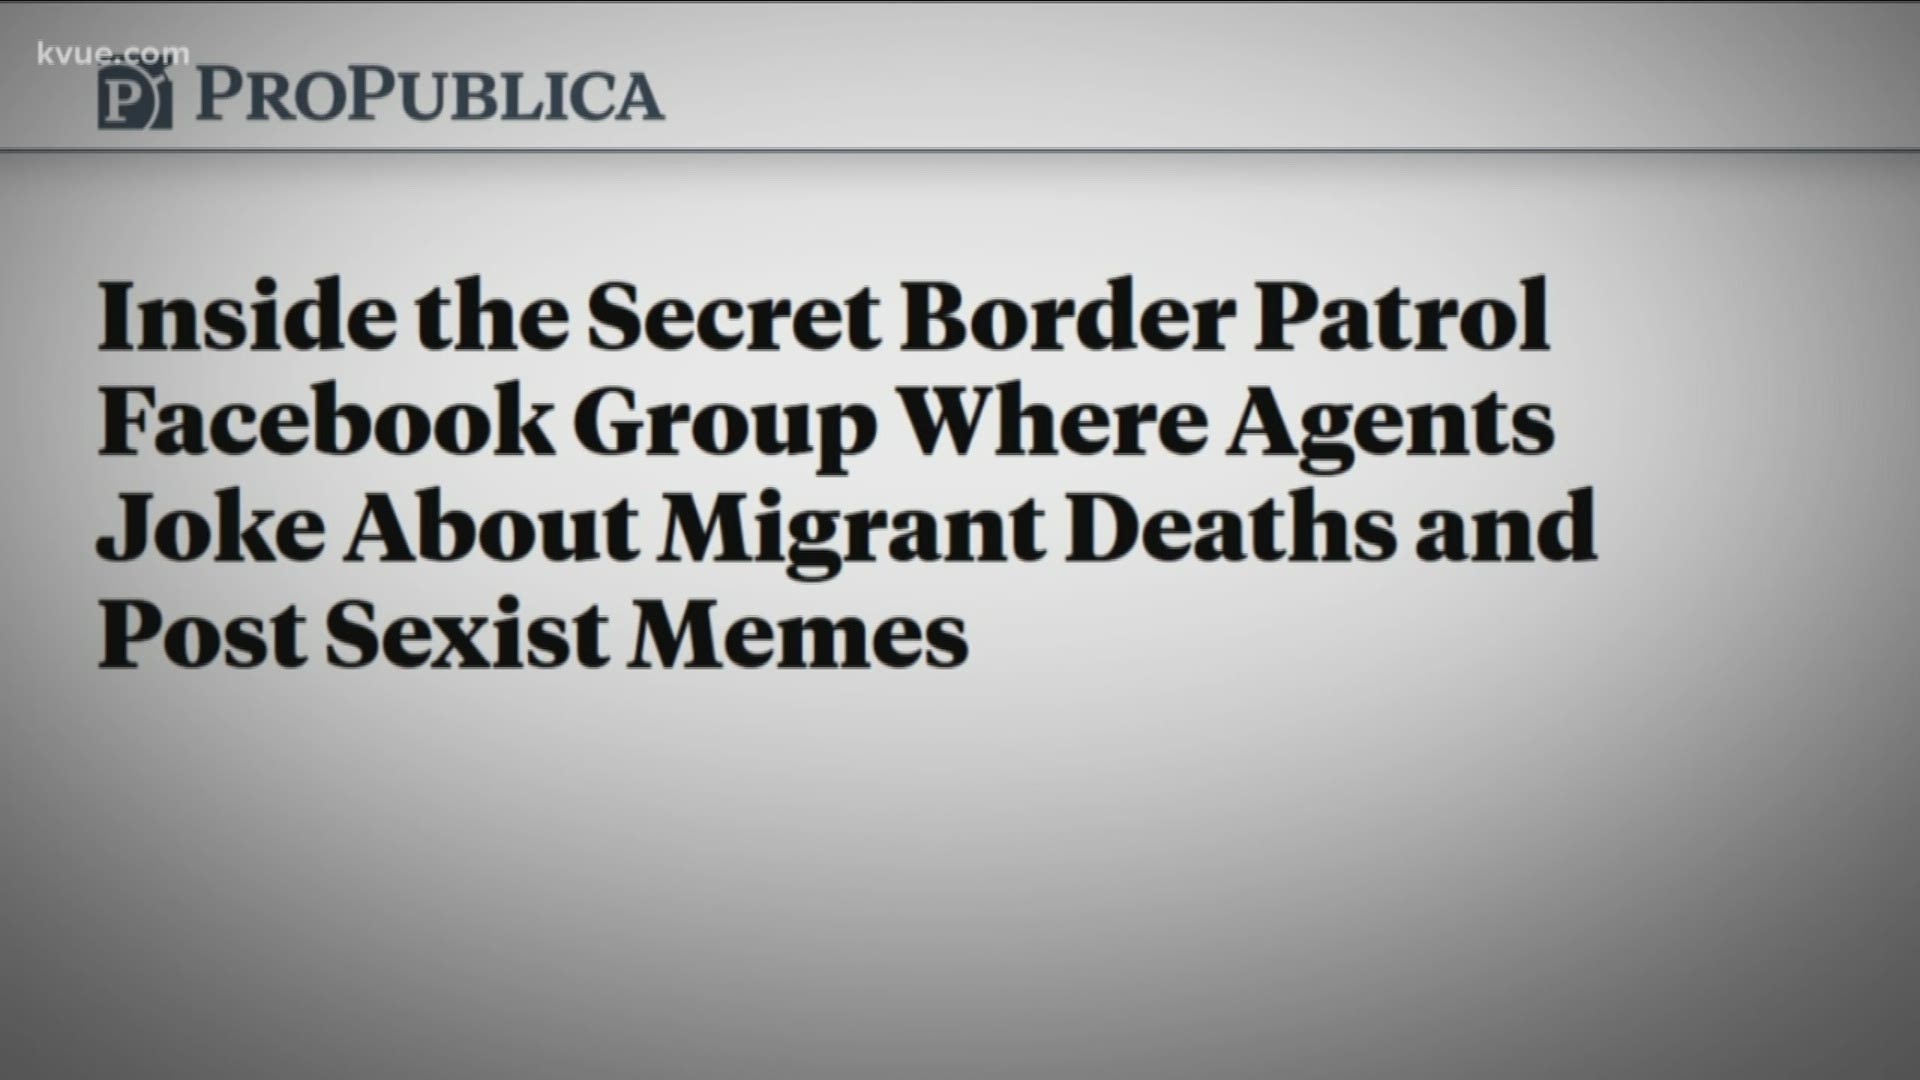 U.S. Customs and Border Protection leaders are investigating what they call "disturbing social media activity" by some agents, following reports of a secret Facebook group.